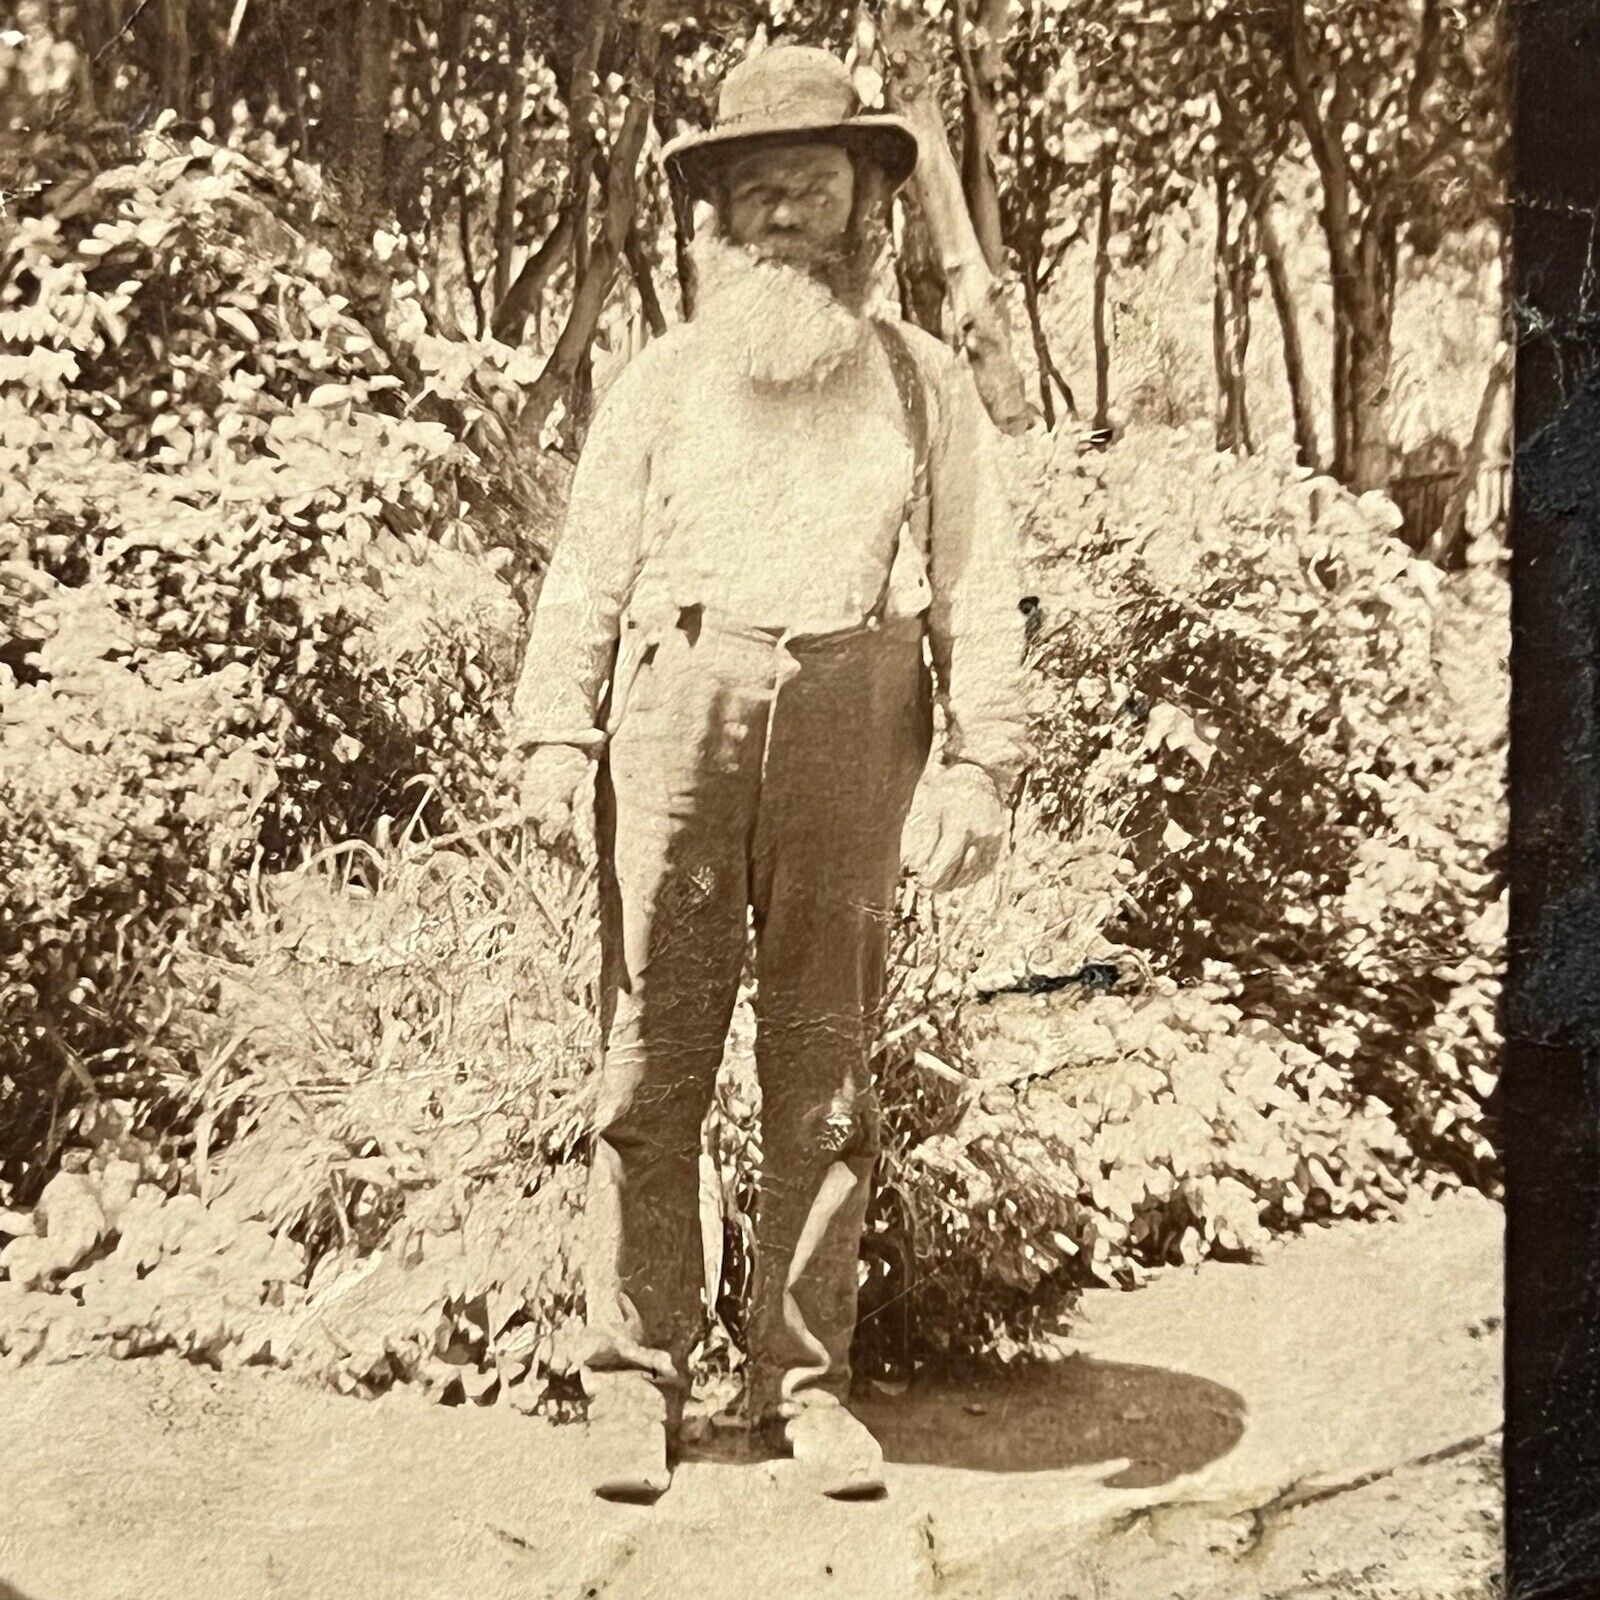 Antique Sepia Snapshot Photograph Bearded Mountain Man With Suspenders